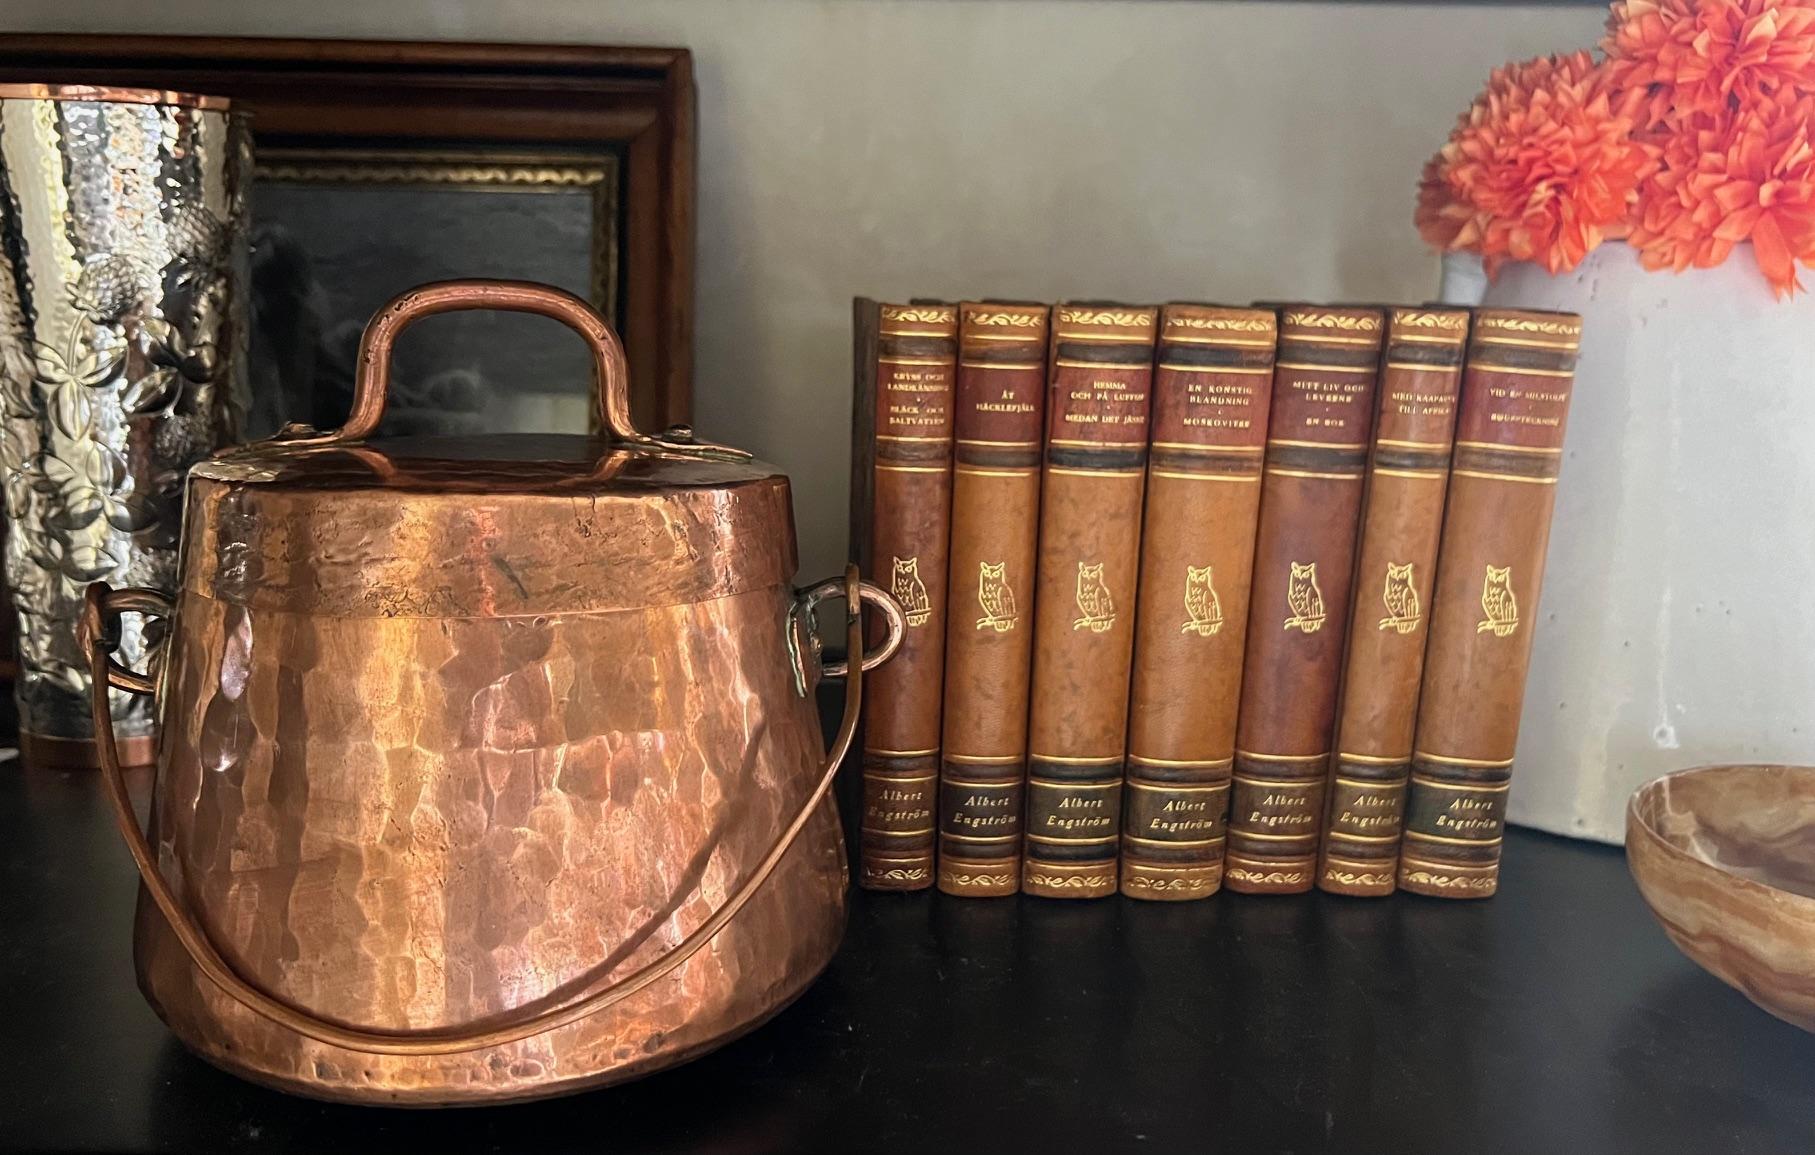 Antique copper cauldron and lid, handmade in the 19th century in France.  Originally this piece would have been a fireside cooking pot or hung from inside the fireplace to keep food inside warm.  Fill it with ice and use it as a unique champagne